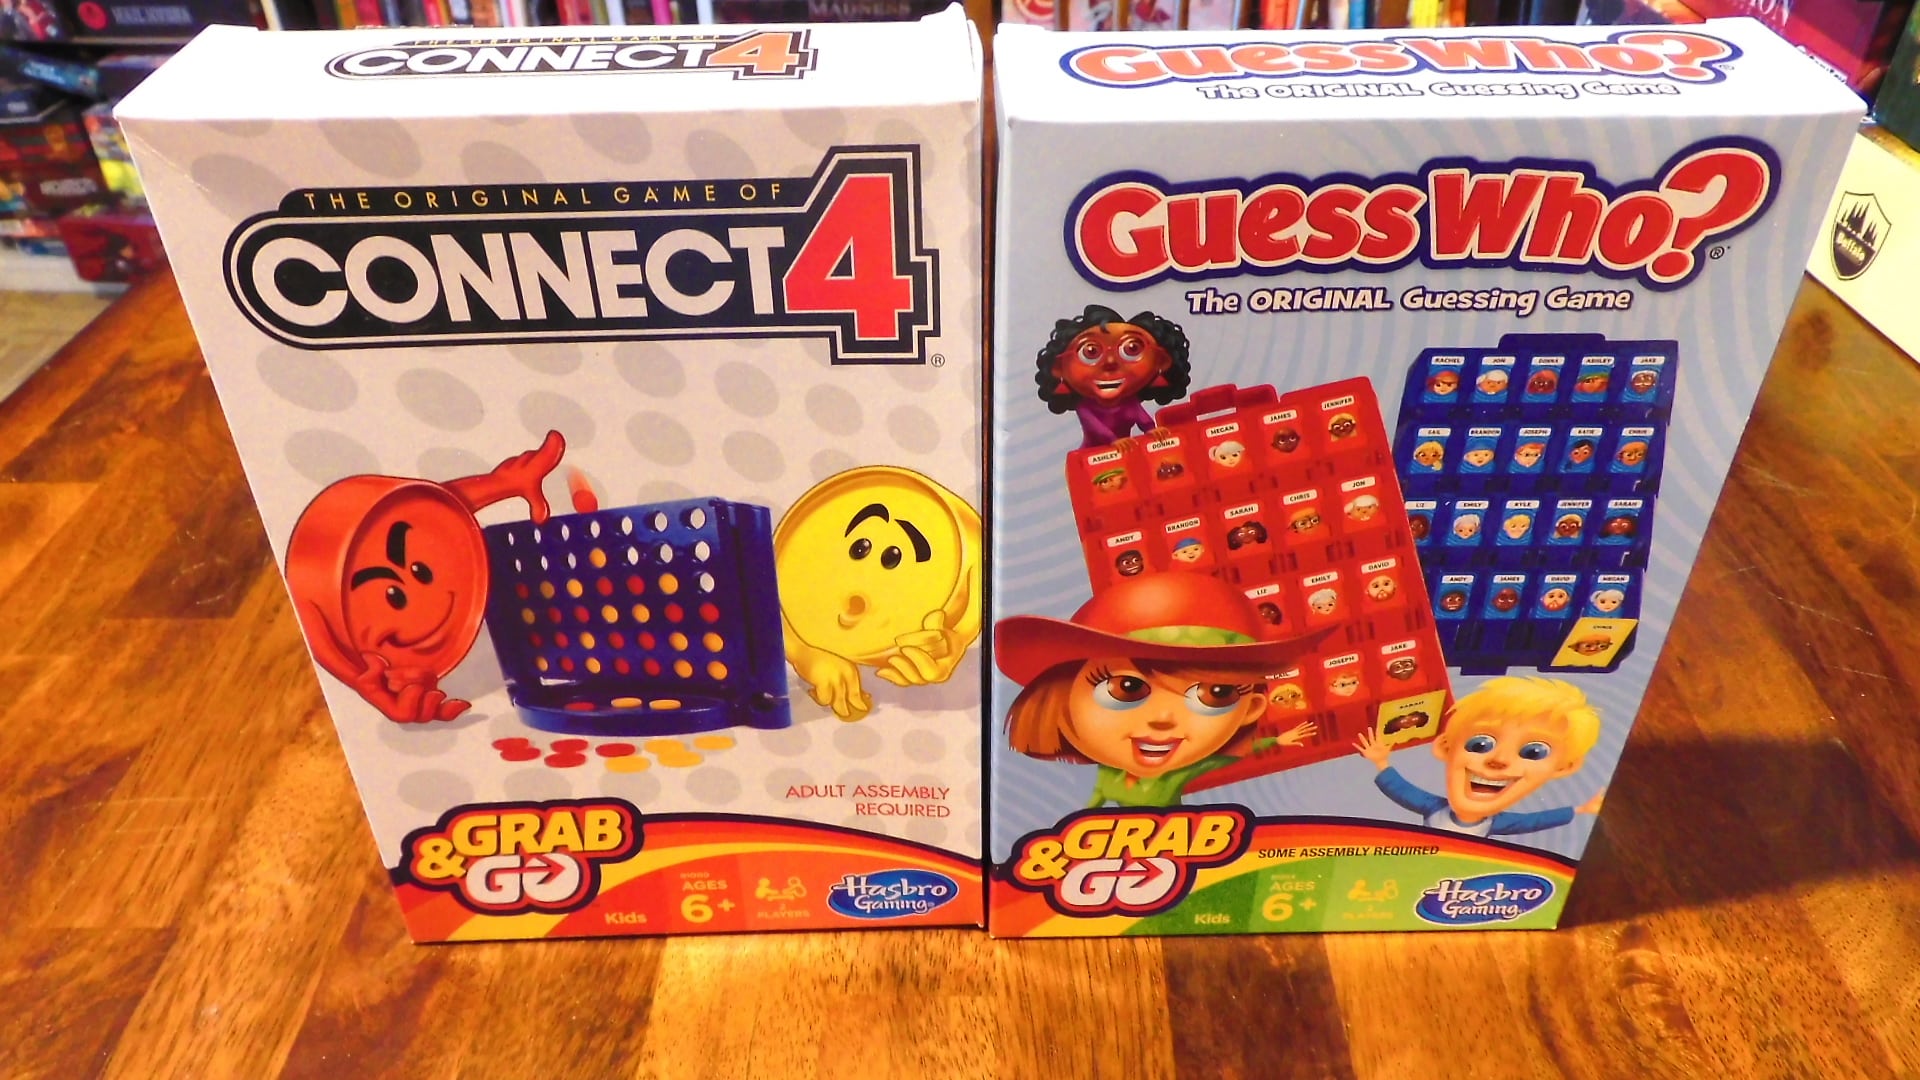 The Connect 4 Grab & Go and Guess Who? Grab & Go boxes beside each other on a table.